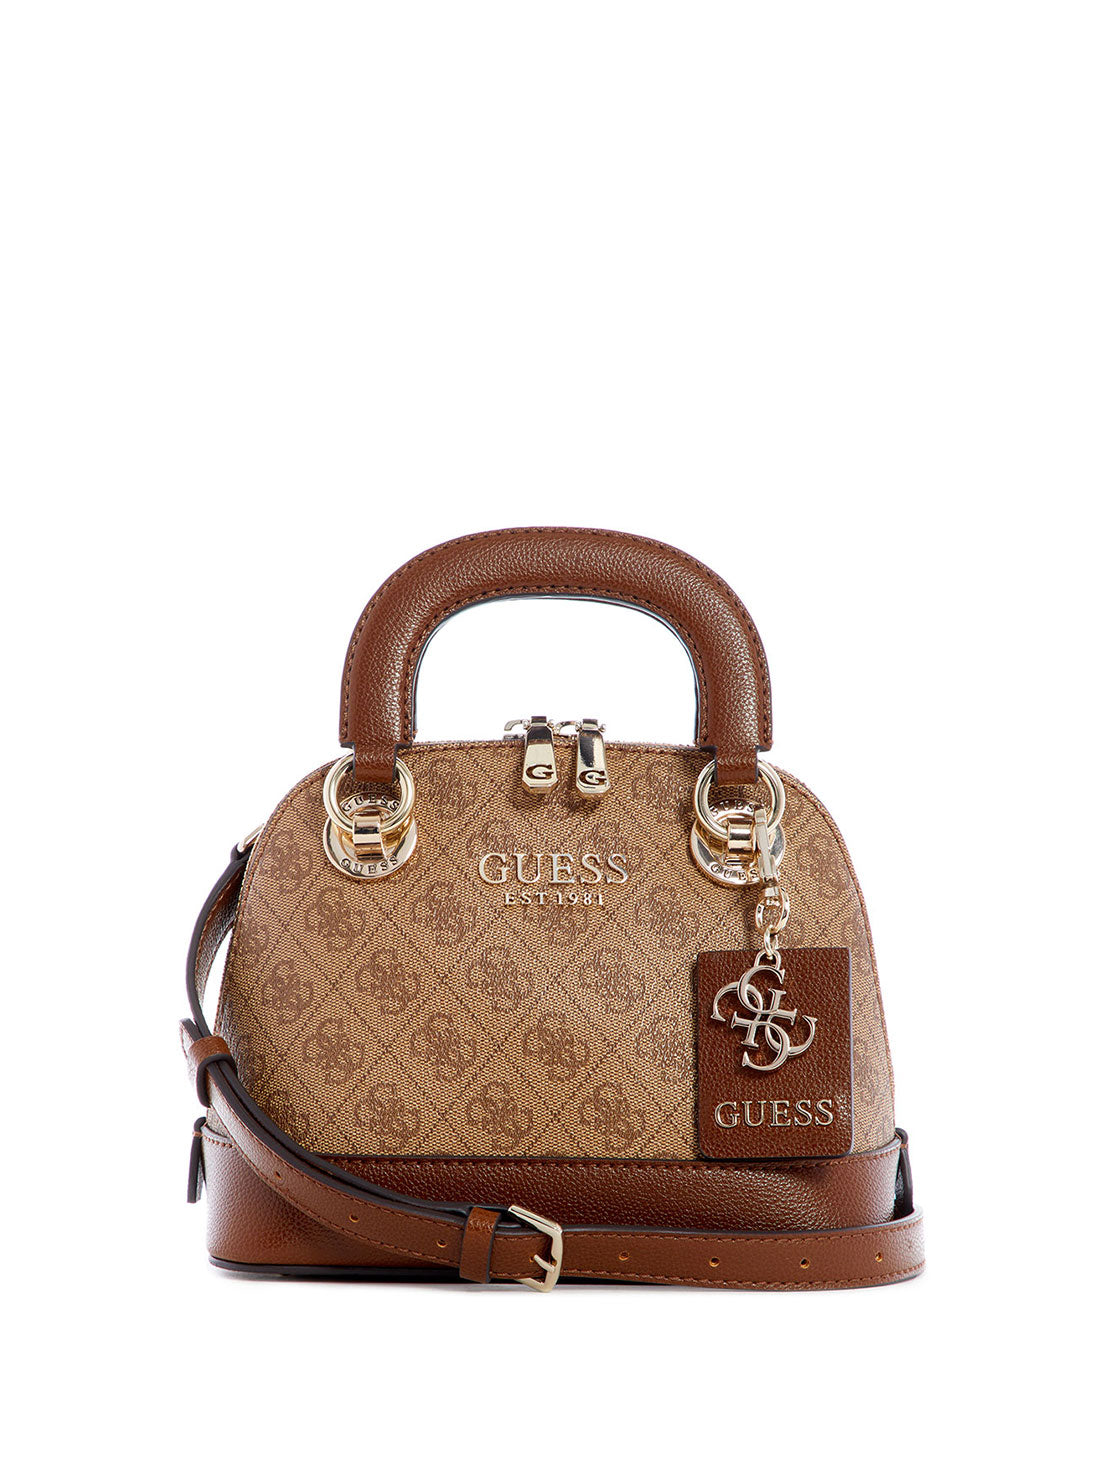 GUESS Womens  Brown Cathleen Small Dome Satchel SG773705 Front View